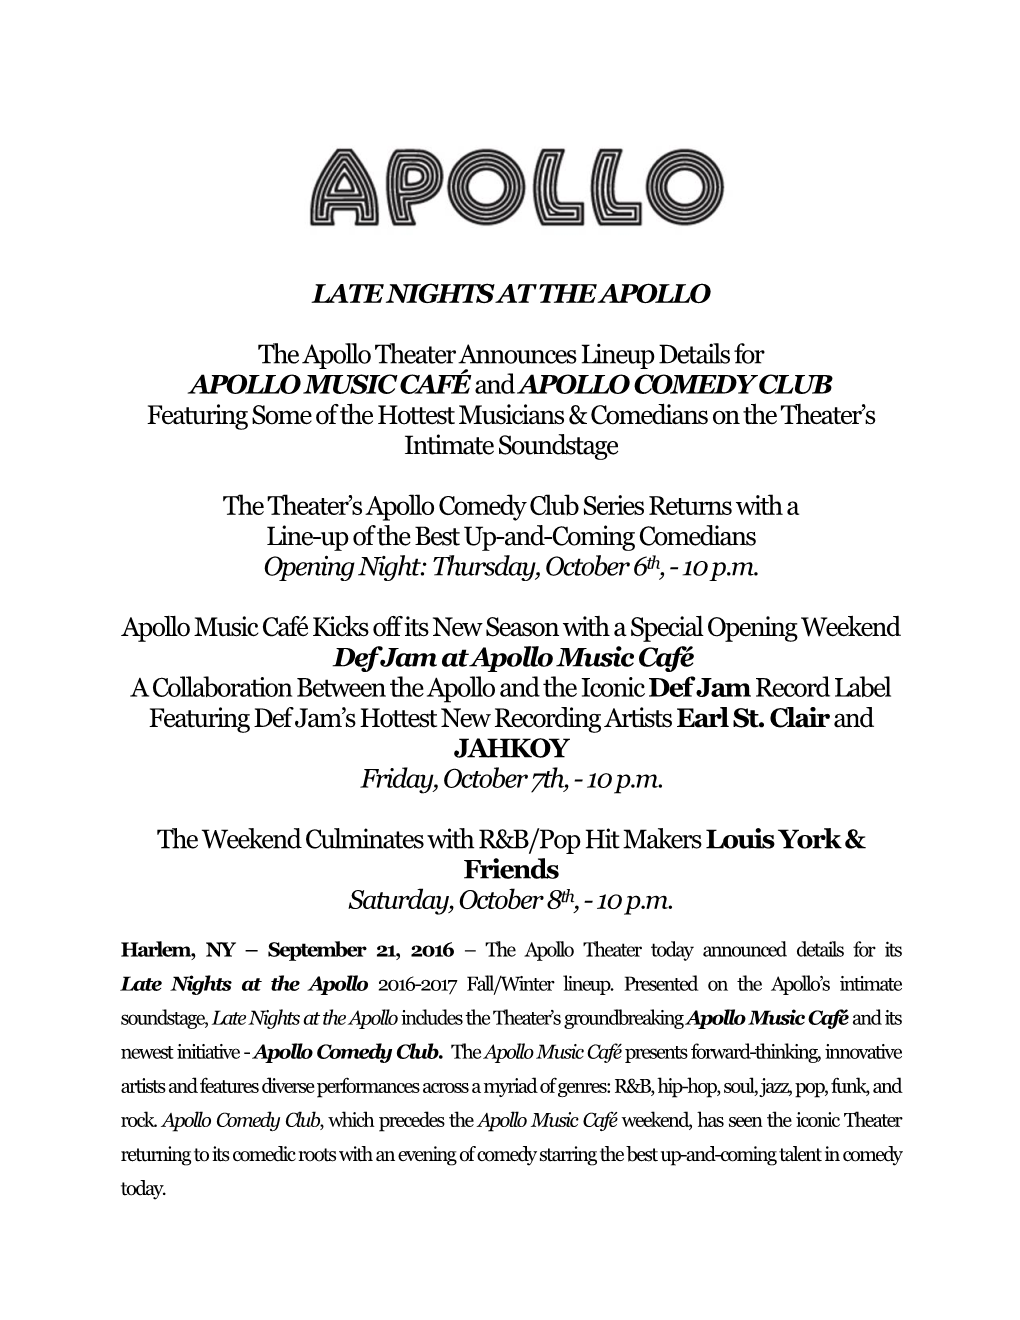 Late Nights at the Apollo